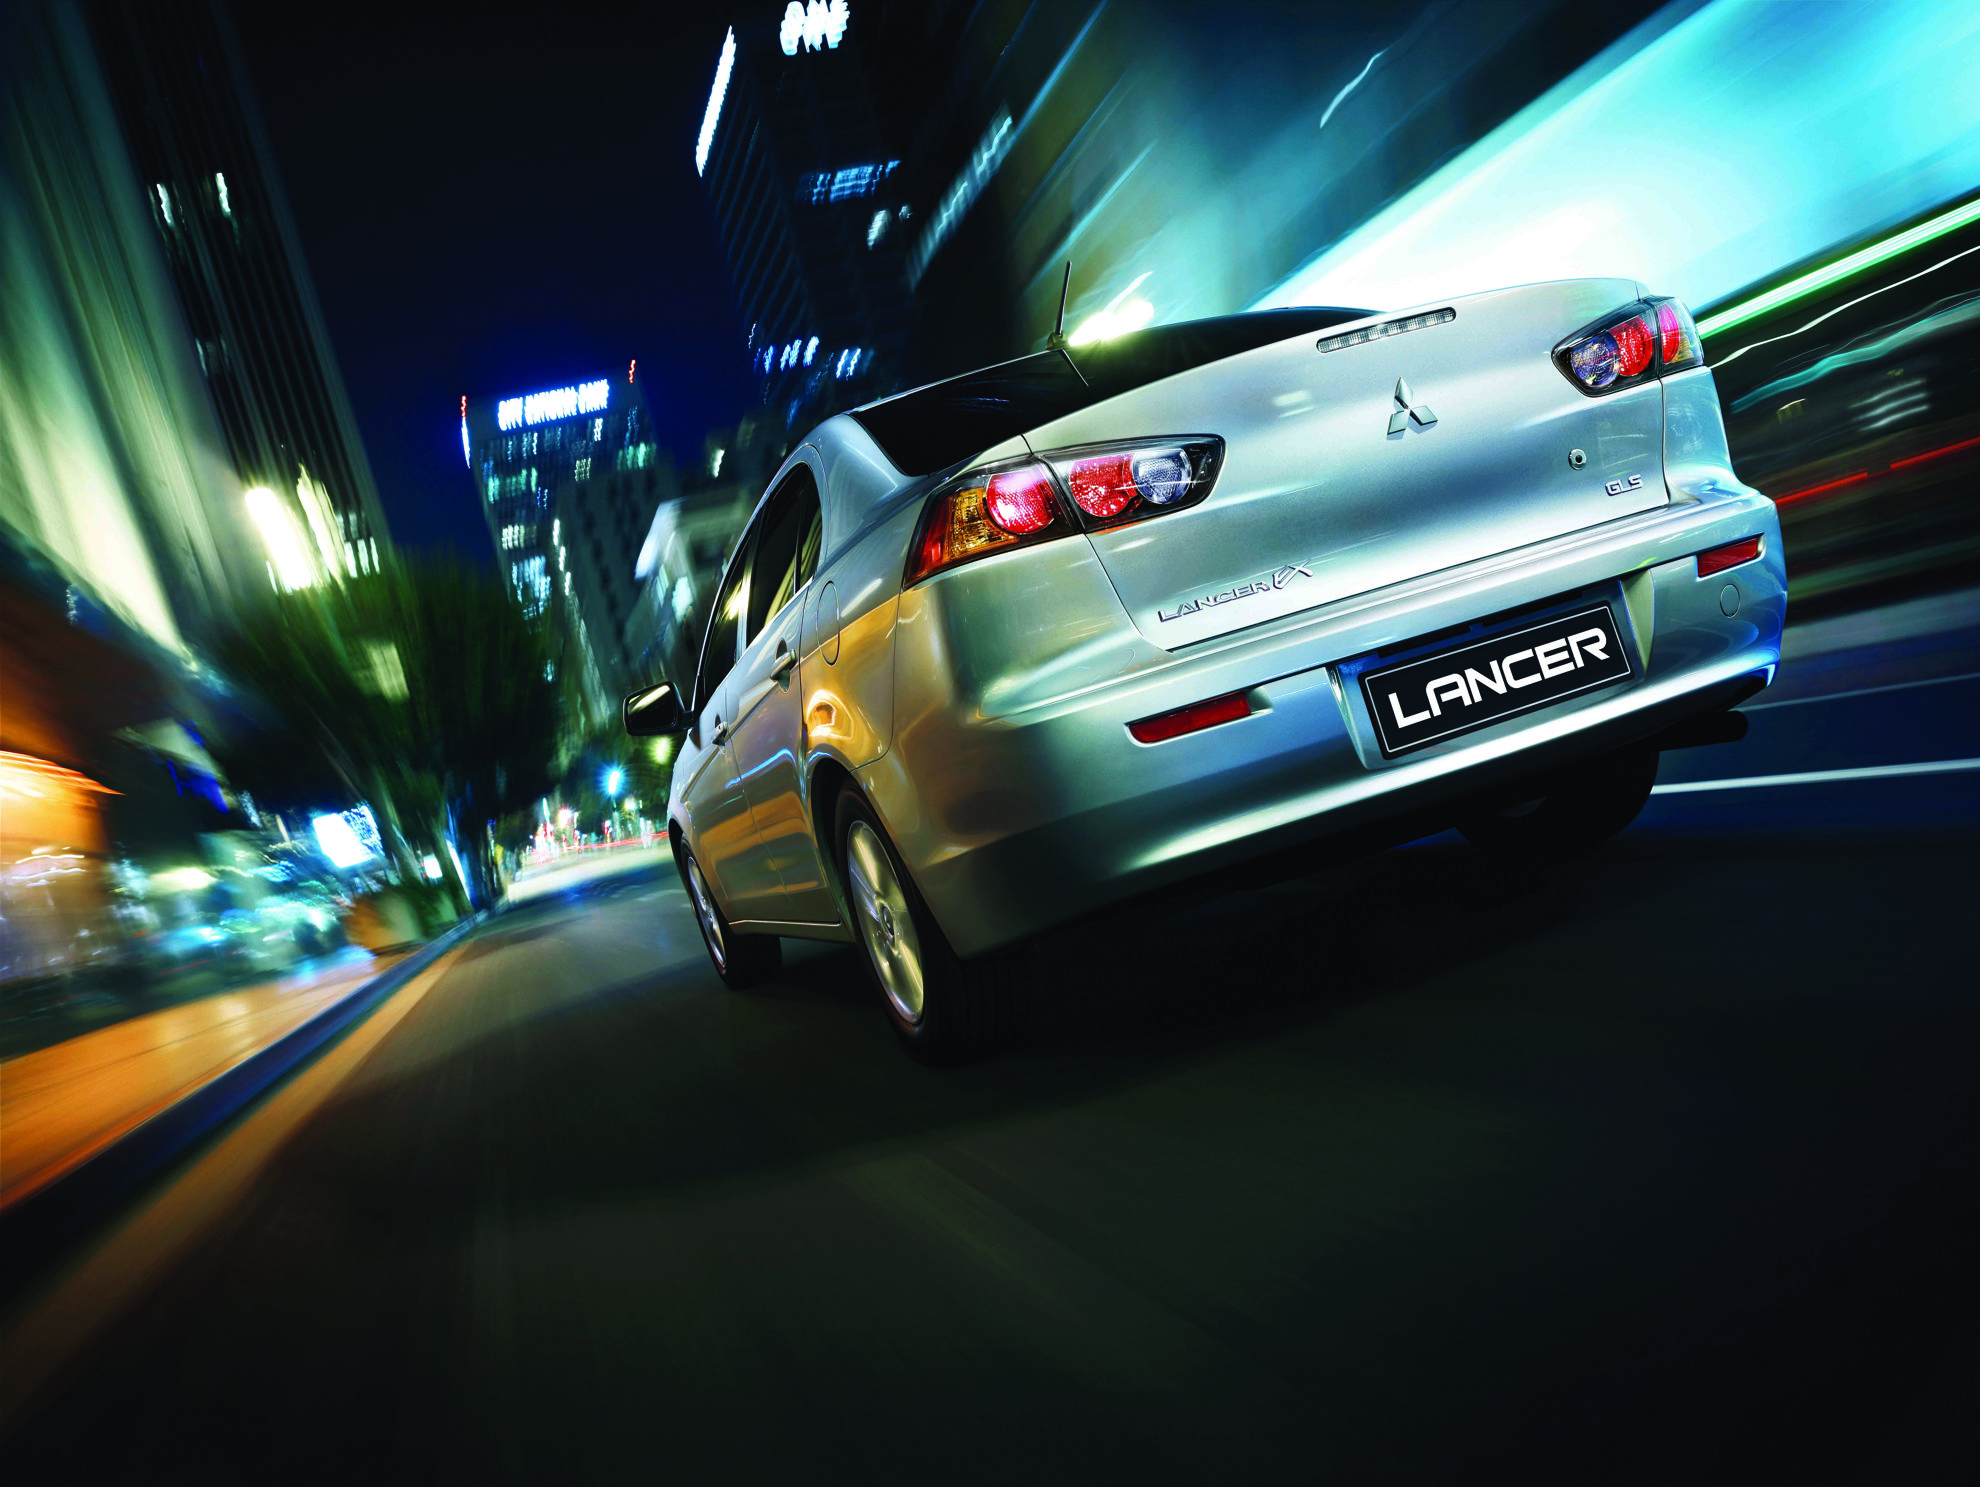 MITSUBISHI LANCER NOW OFFERS ADDED VALUE